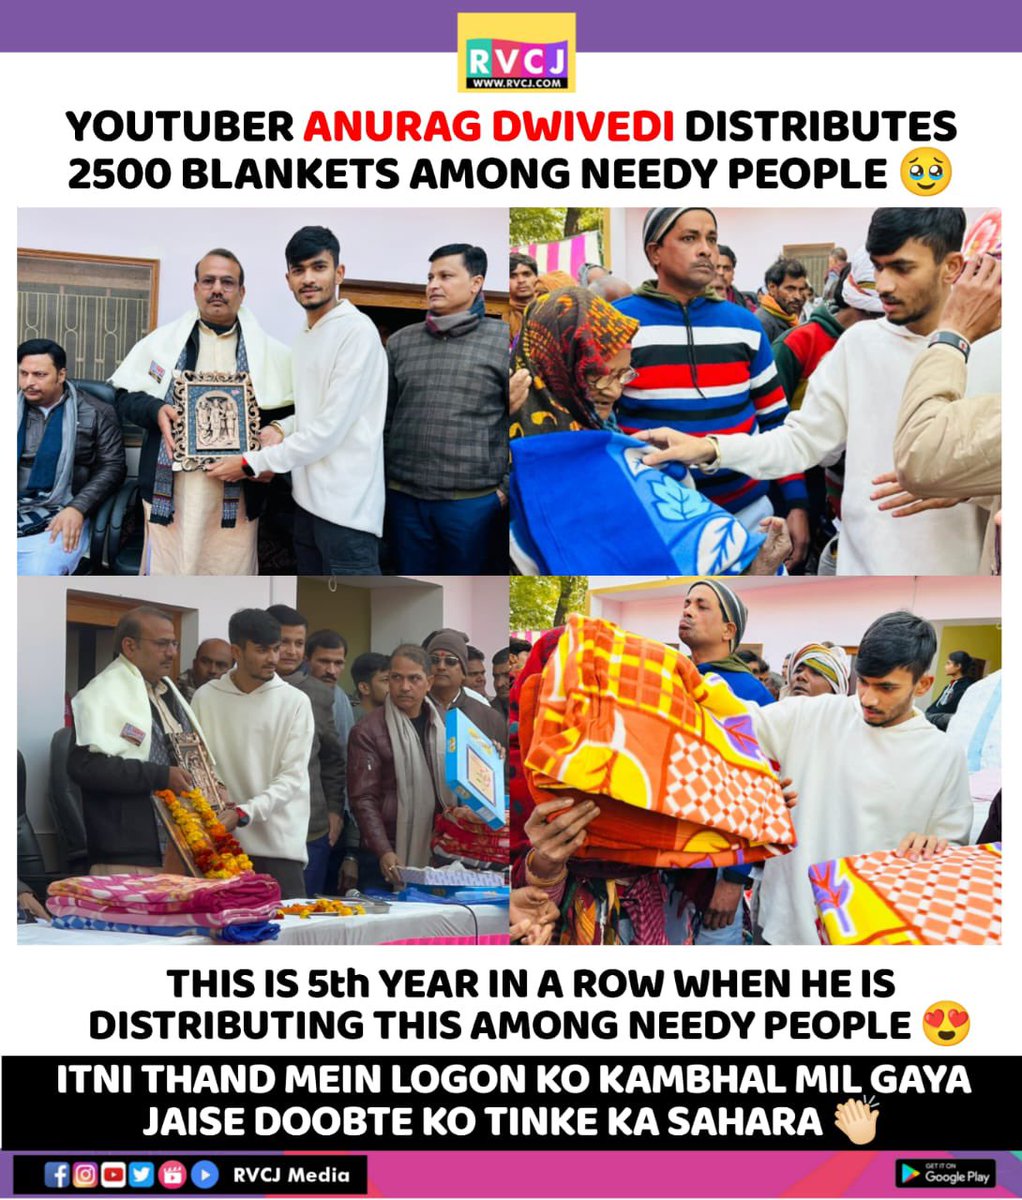 @AnuragxCricket is winning hearts with his noble cause 🫶 God bless you with more power to help the needy 💫